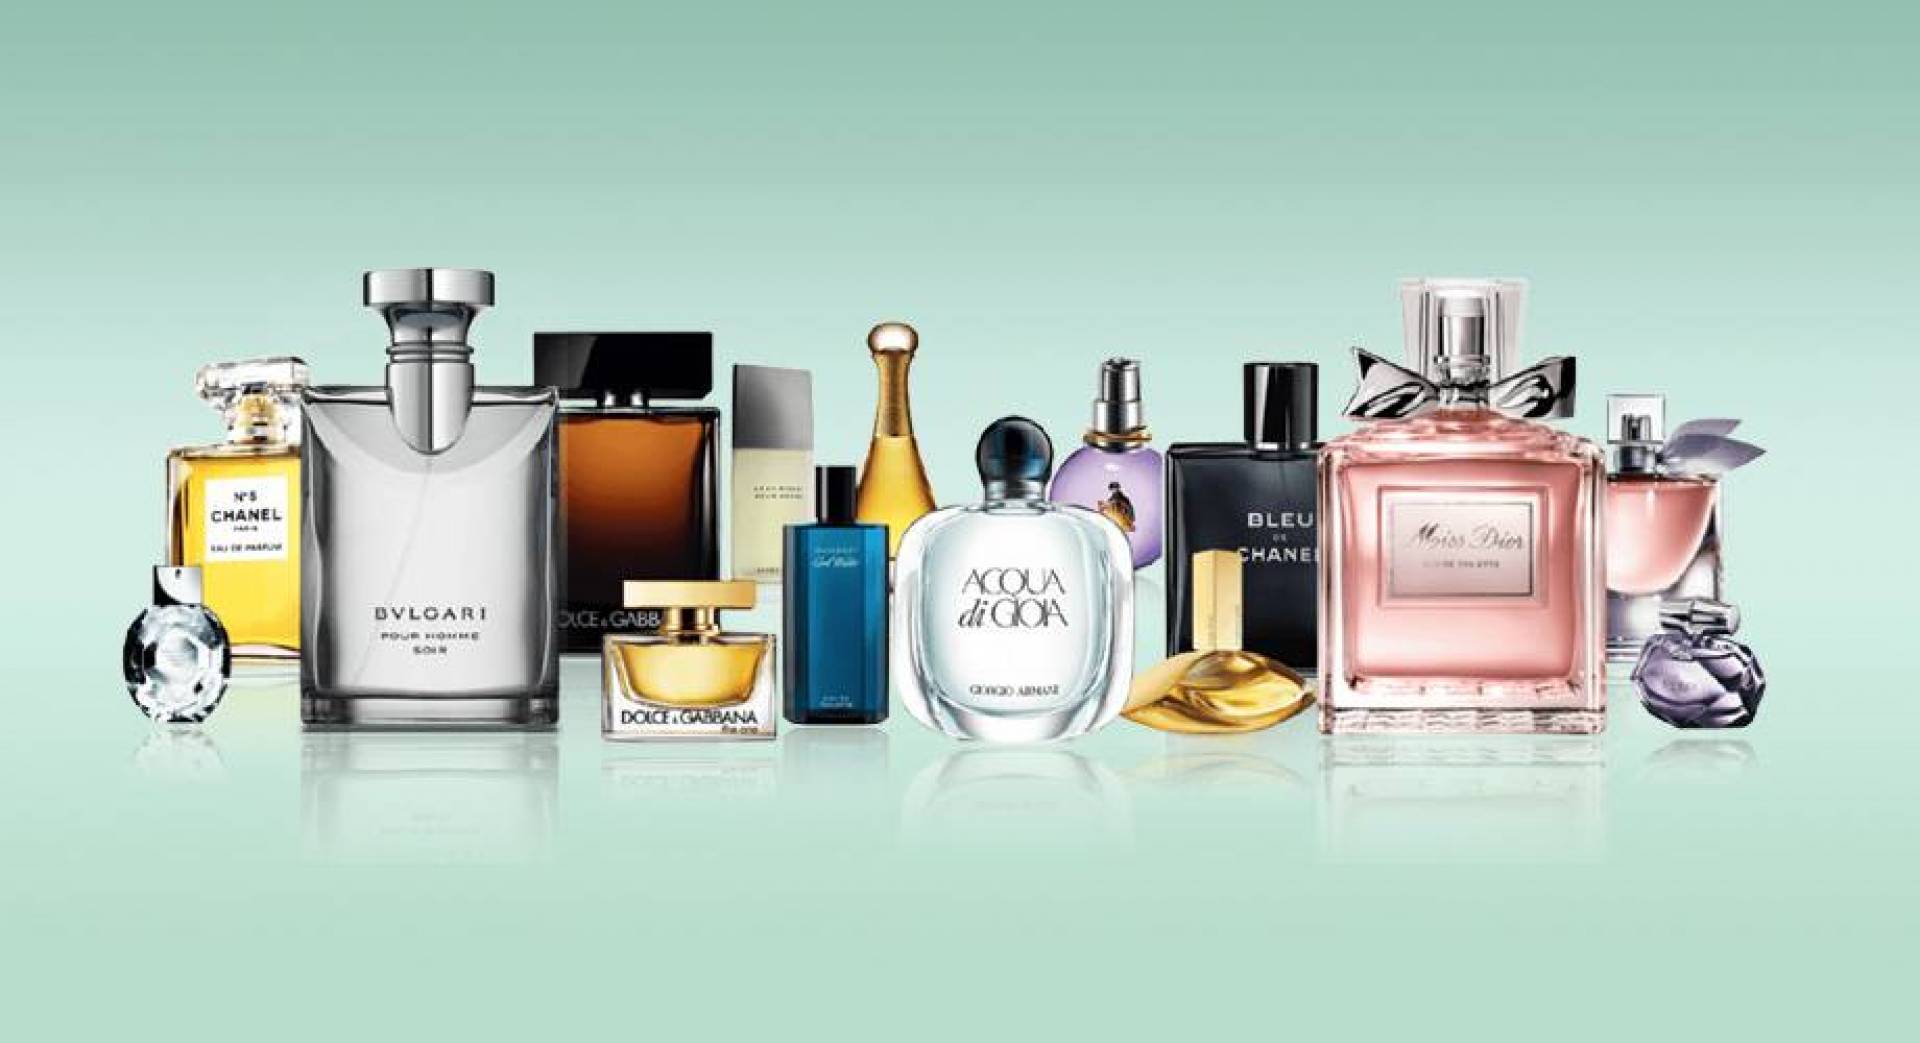 Want To Smell Like A Vanilla Snack? Here Are 10 Fragrances You Need To Try